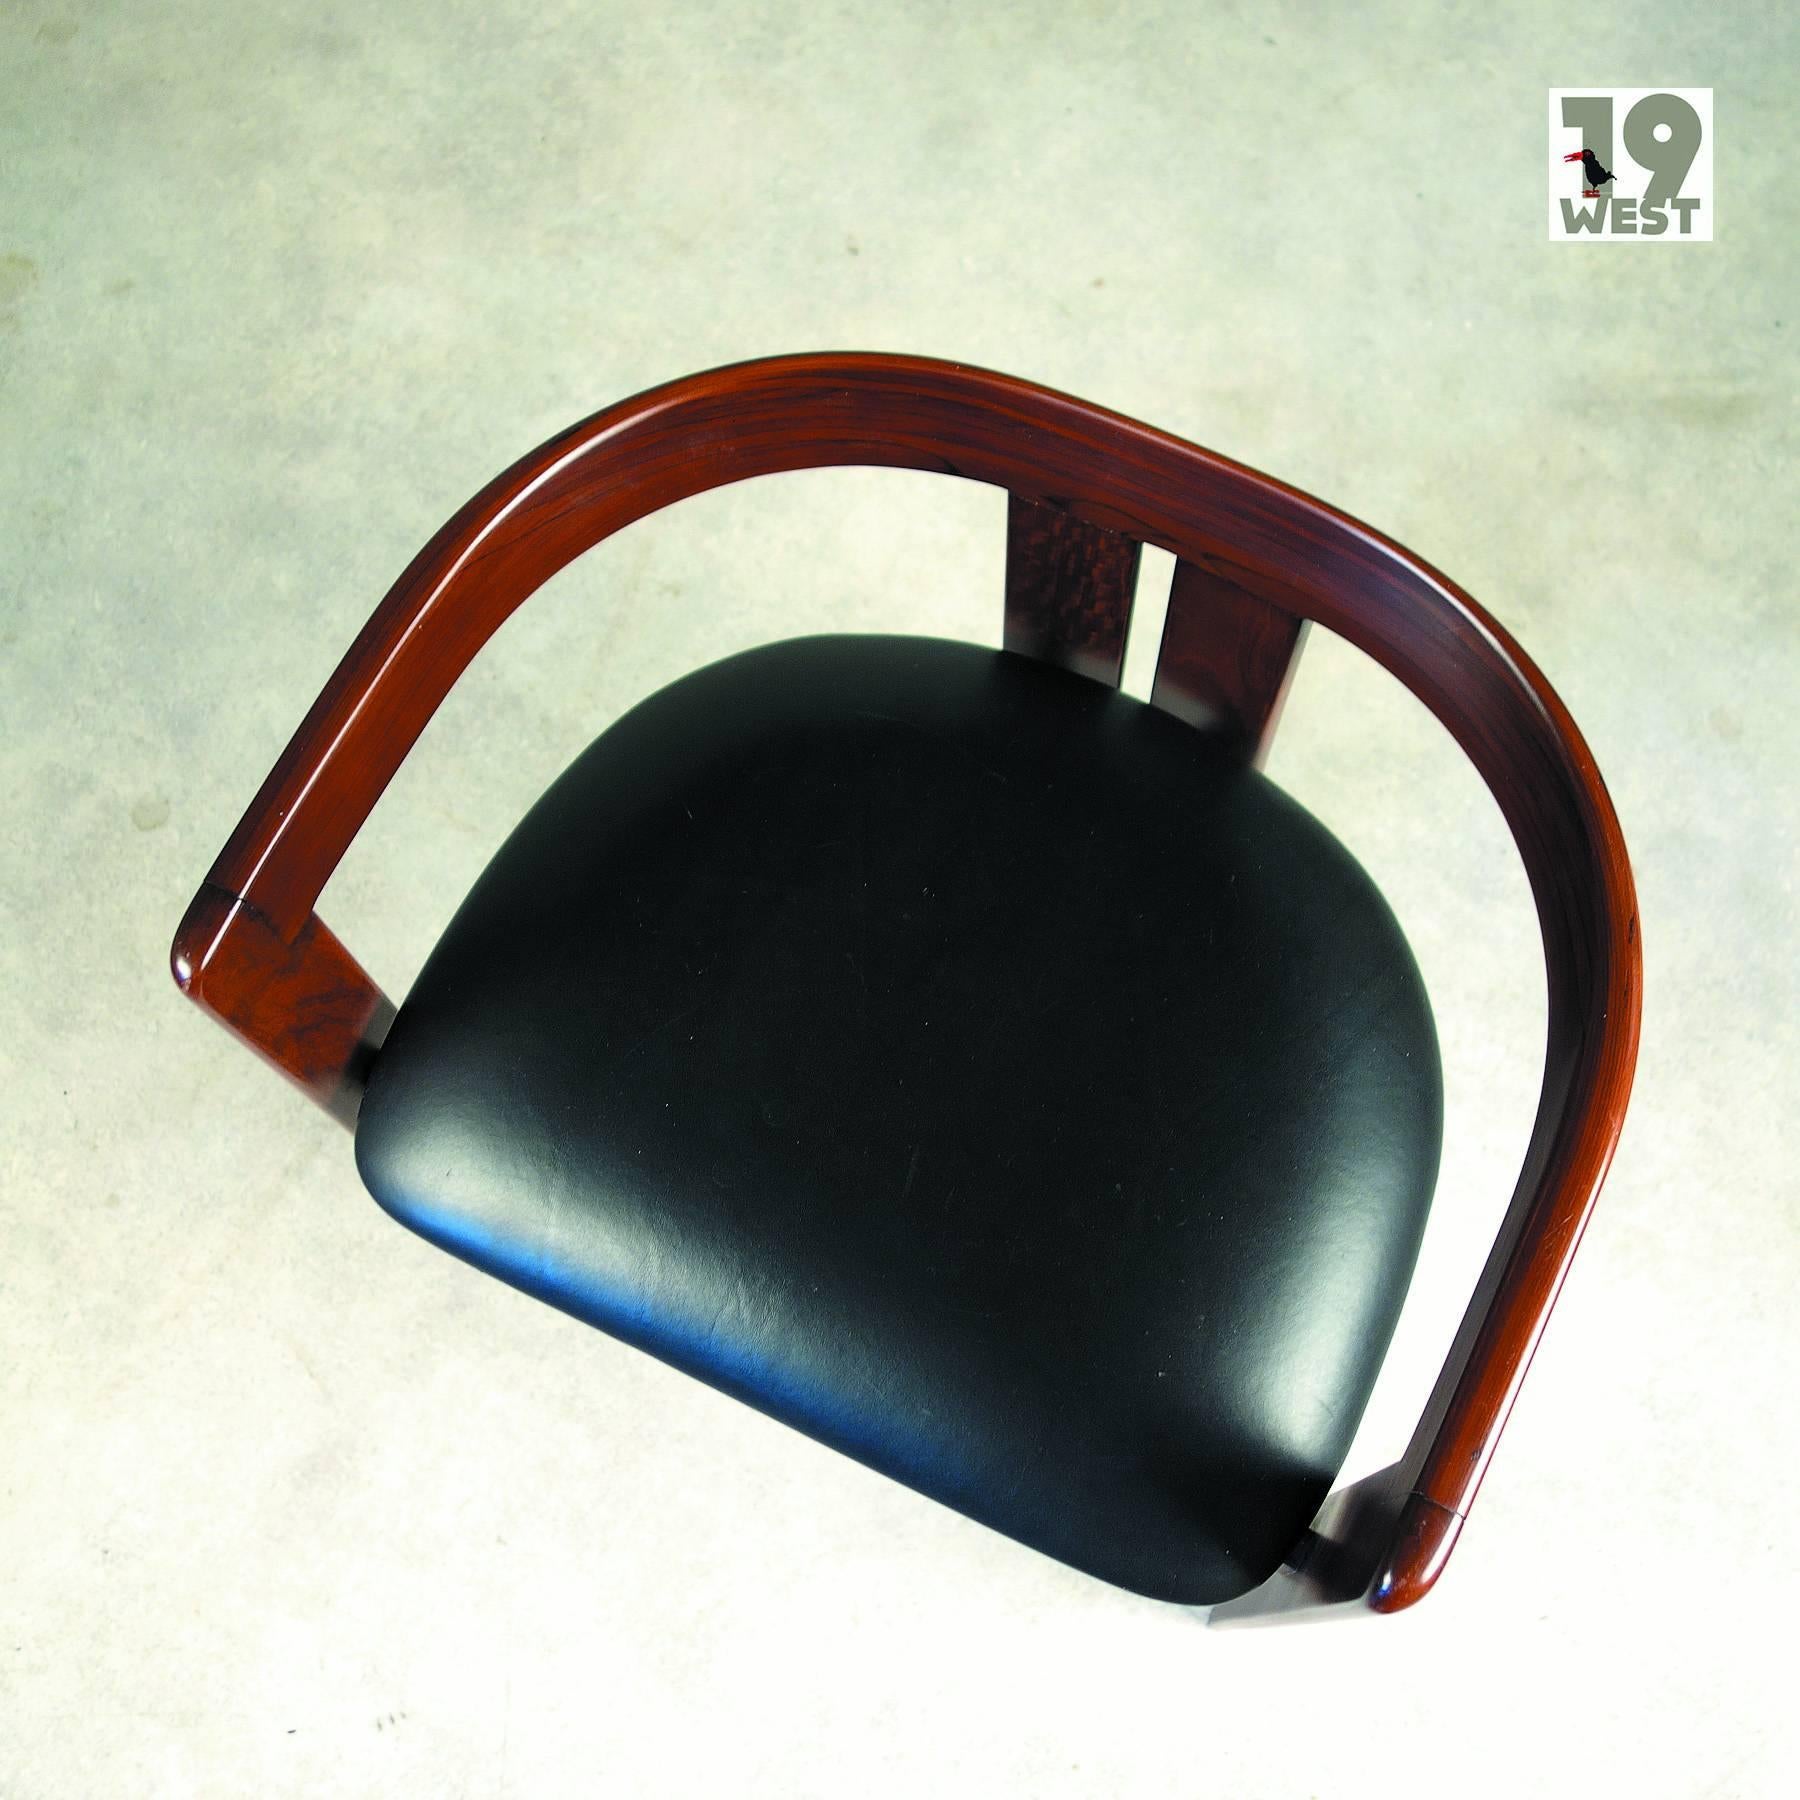 Pigreco Armchair, Designed by Afra & Tobia Scarpa, Manufactured by Gavina 2